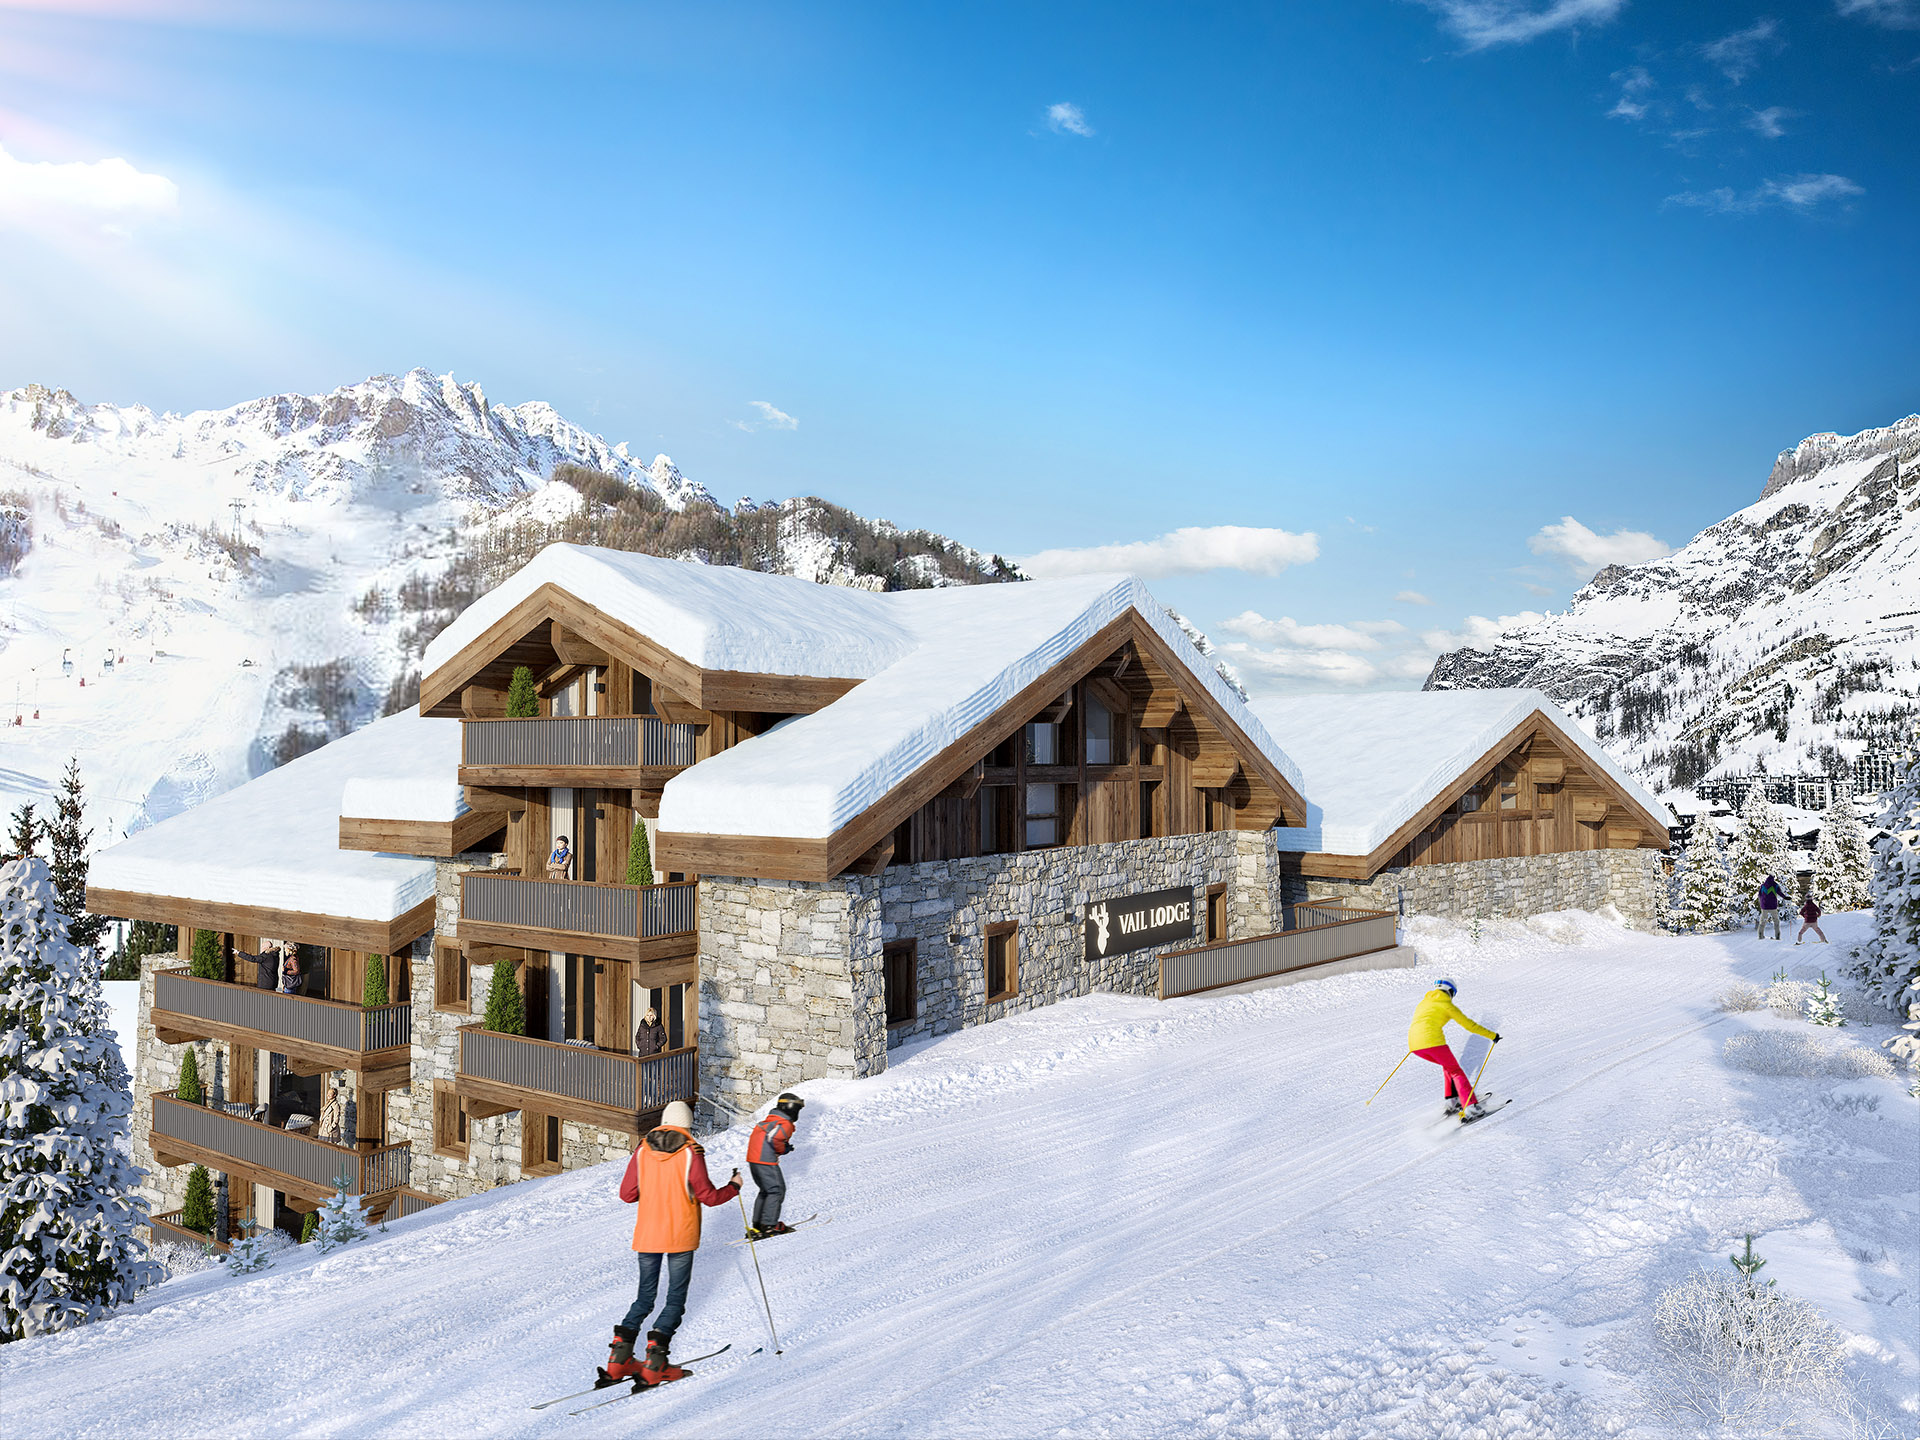 3D representation of a chalet integration in the mountain, next to the ski slopes